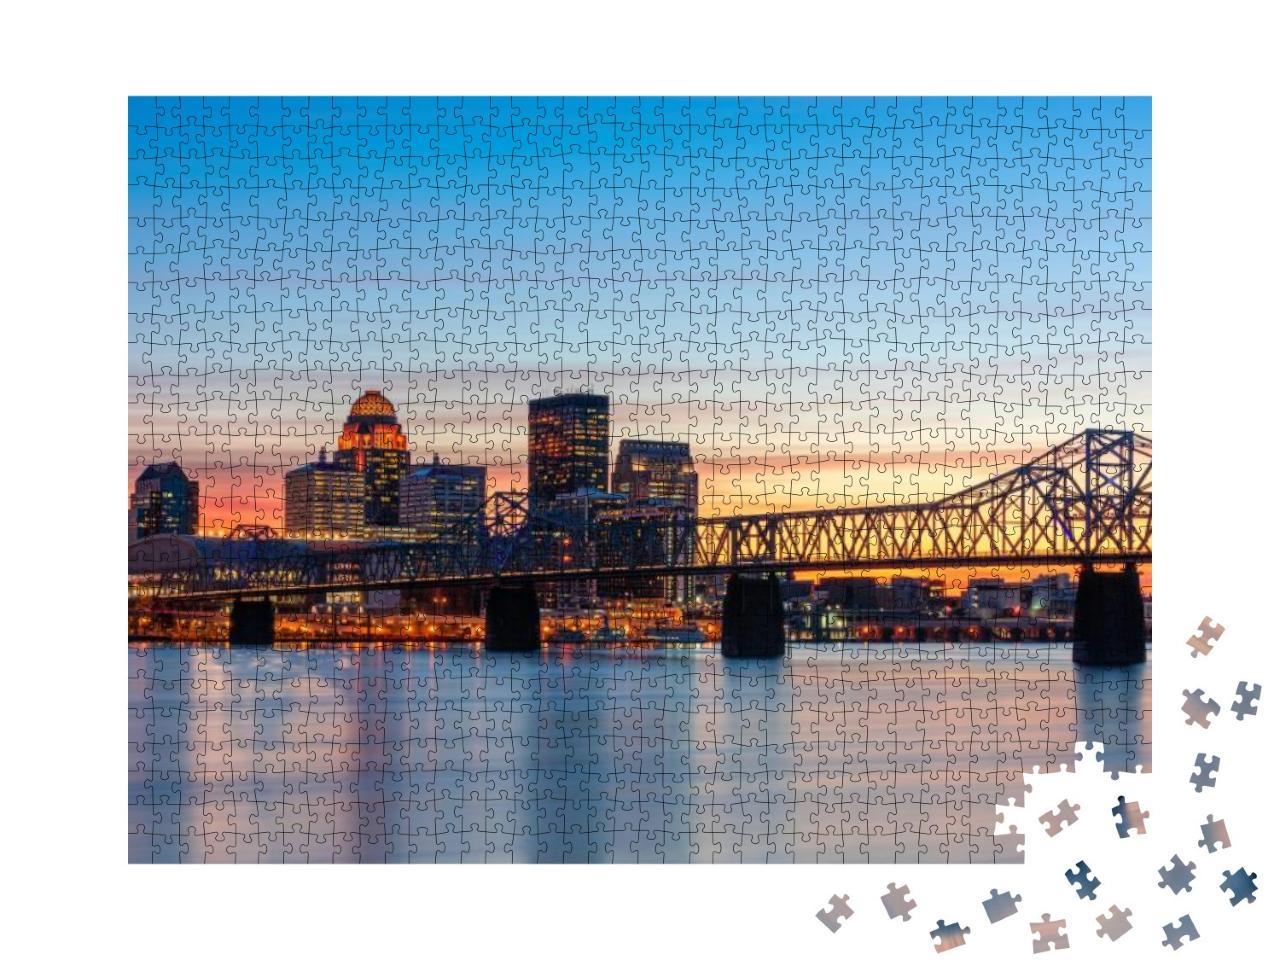 Louisville, Kentucky, USA Skyline on the River At Dusk... Jigsaw Puzzle with 1000 pieces